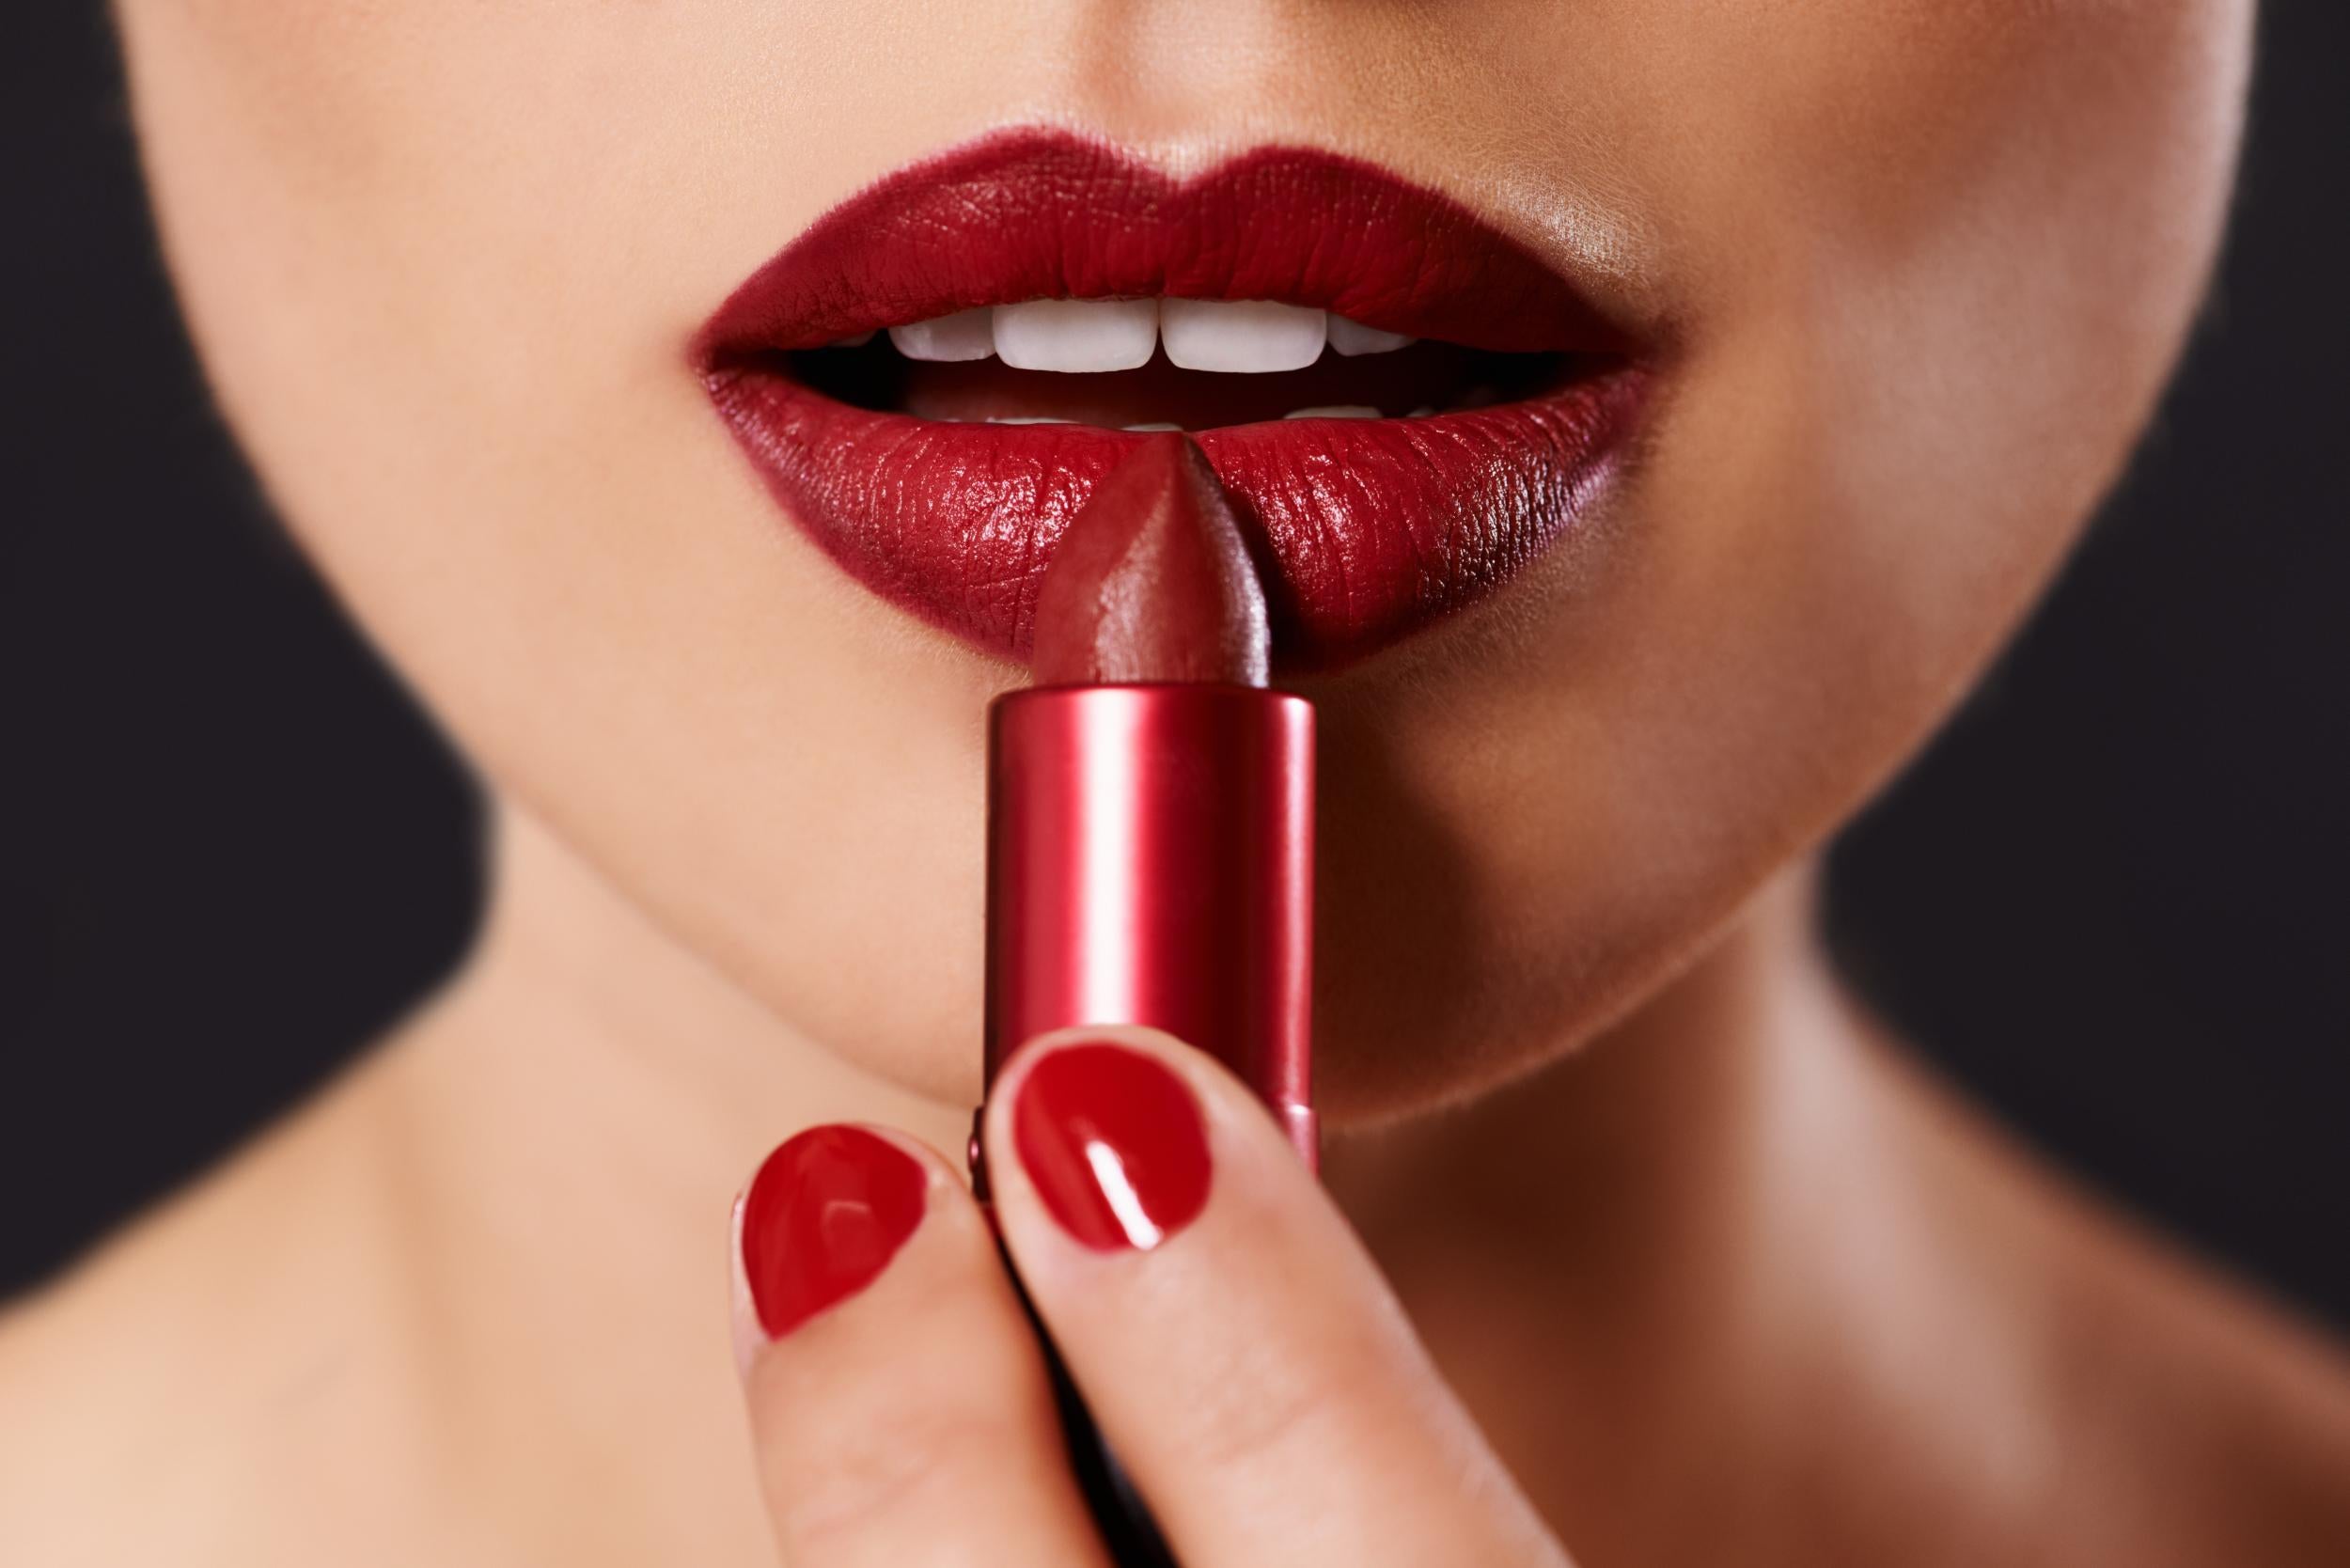 Lip products are the worst offenders for carrying germs